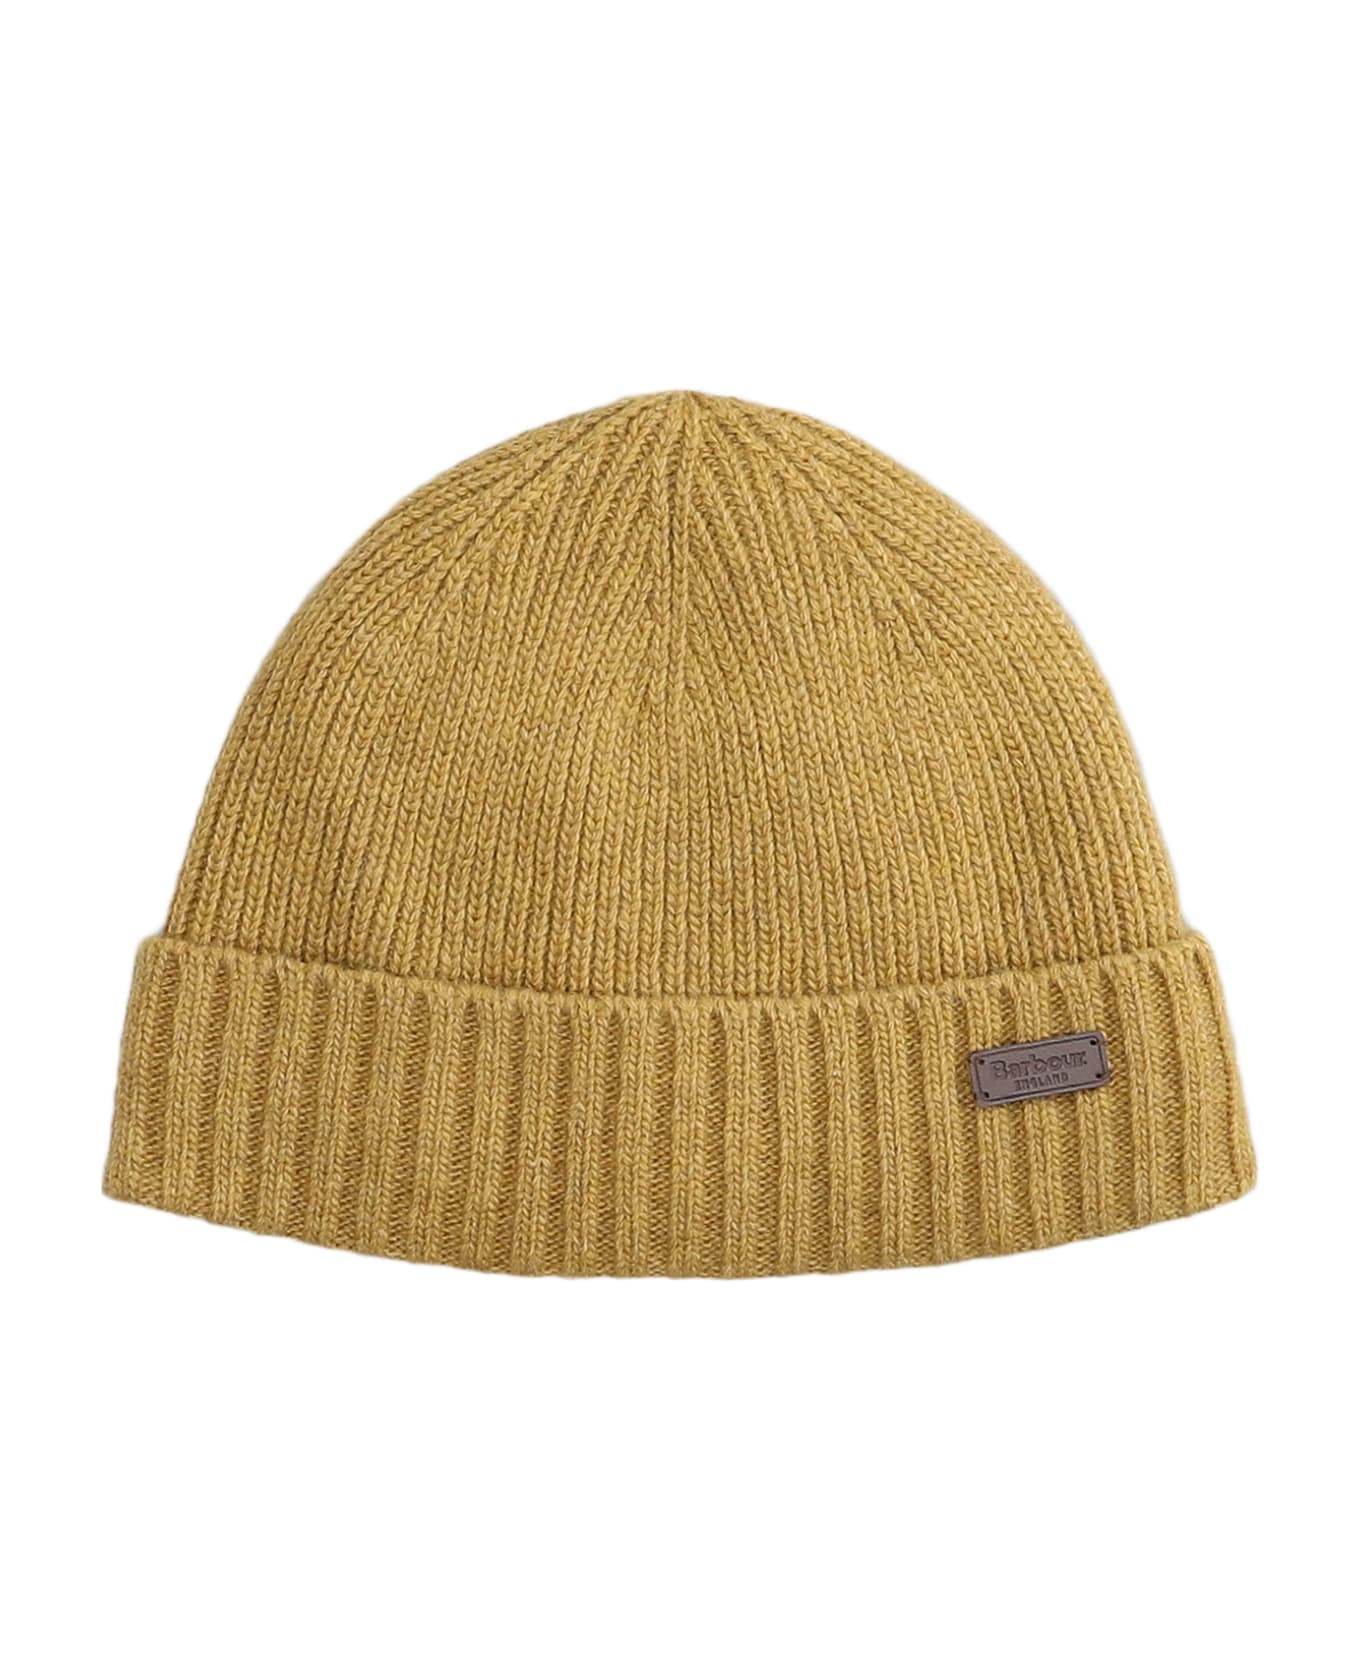 Barbour Carlton Beanie Hats In Yellow Wool - Harvest Gold